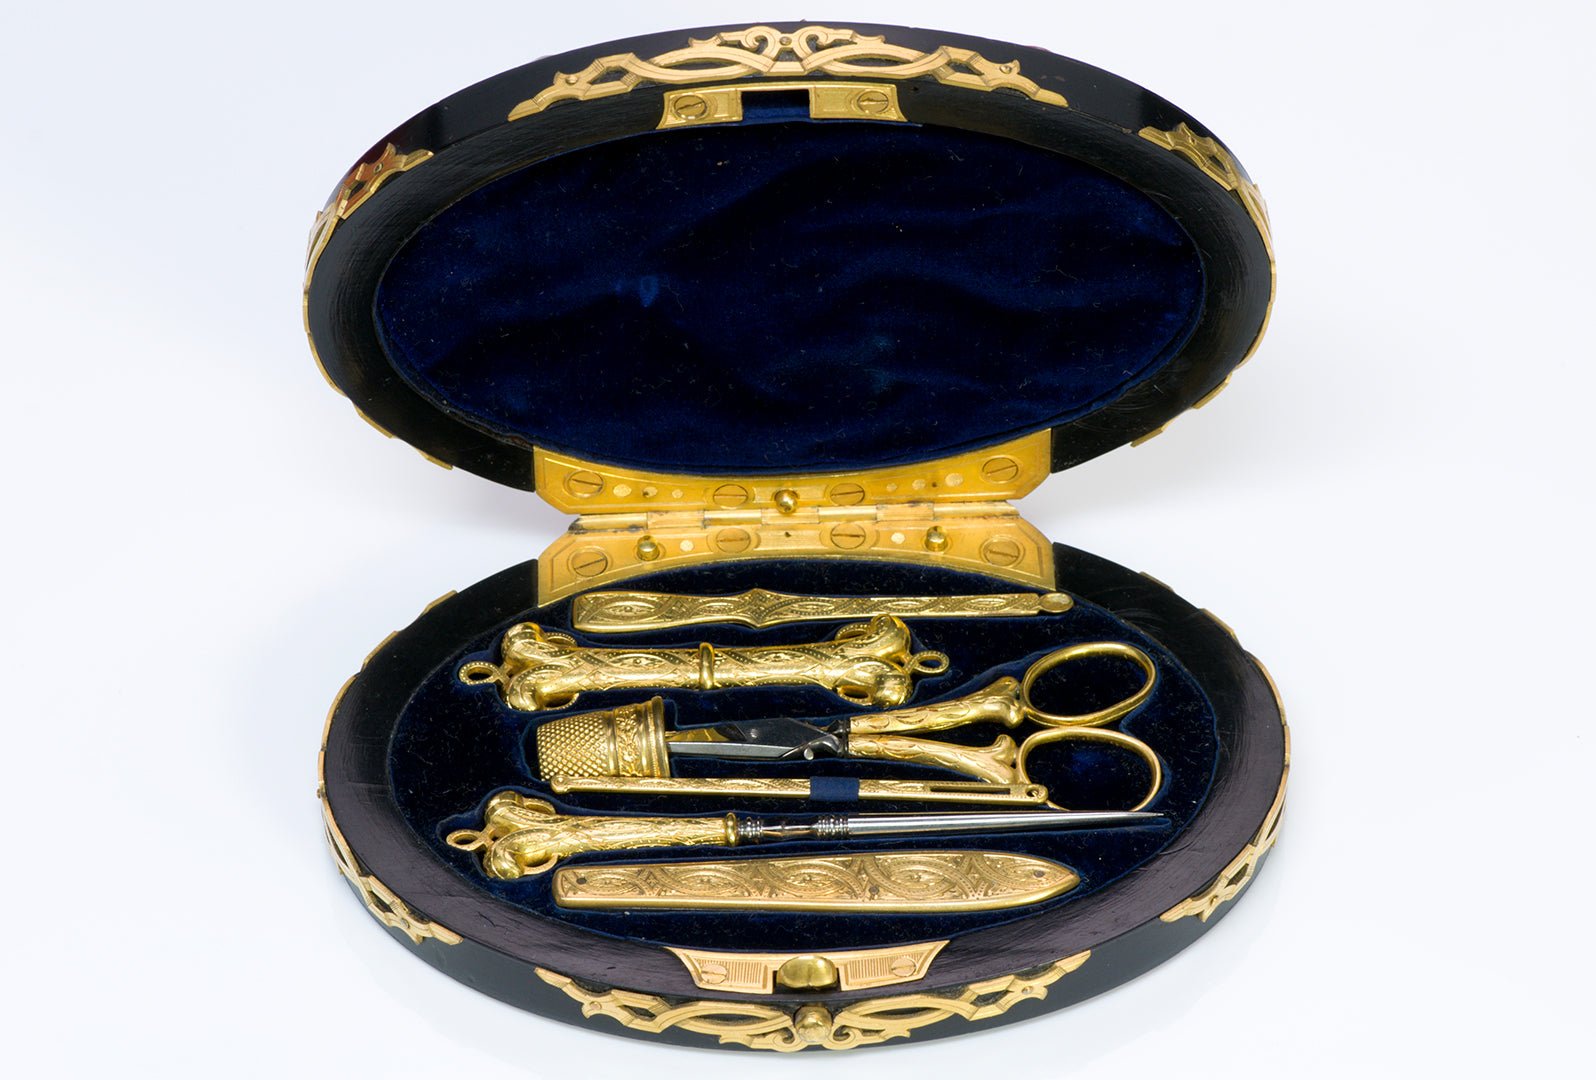 Antique Gilt Bronze Jeweled Agate Sewing Kit